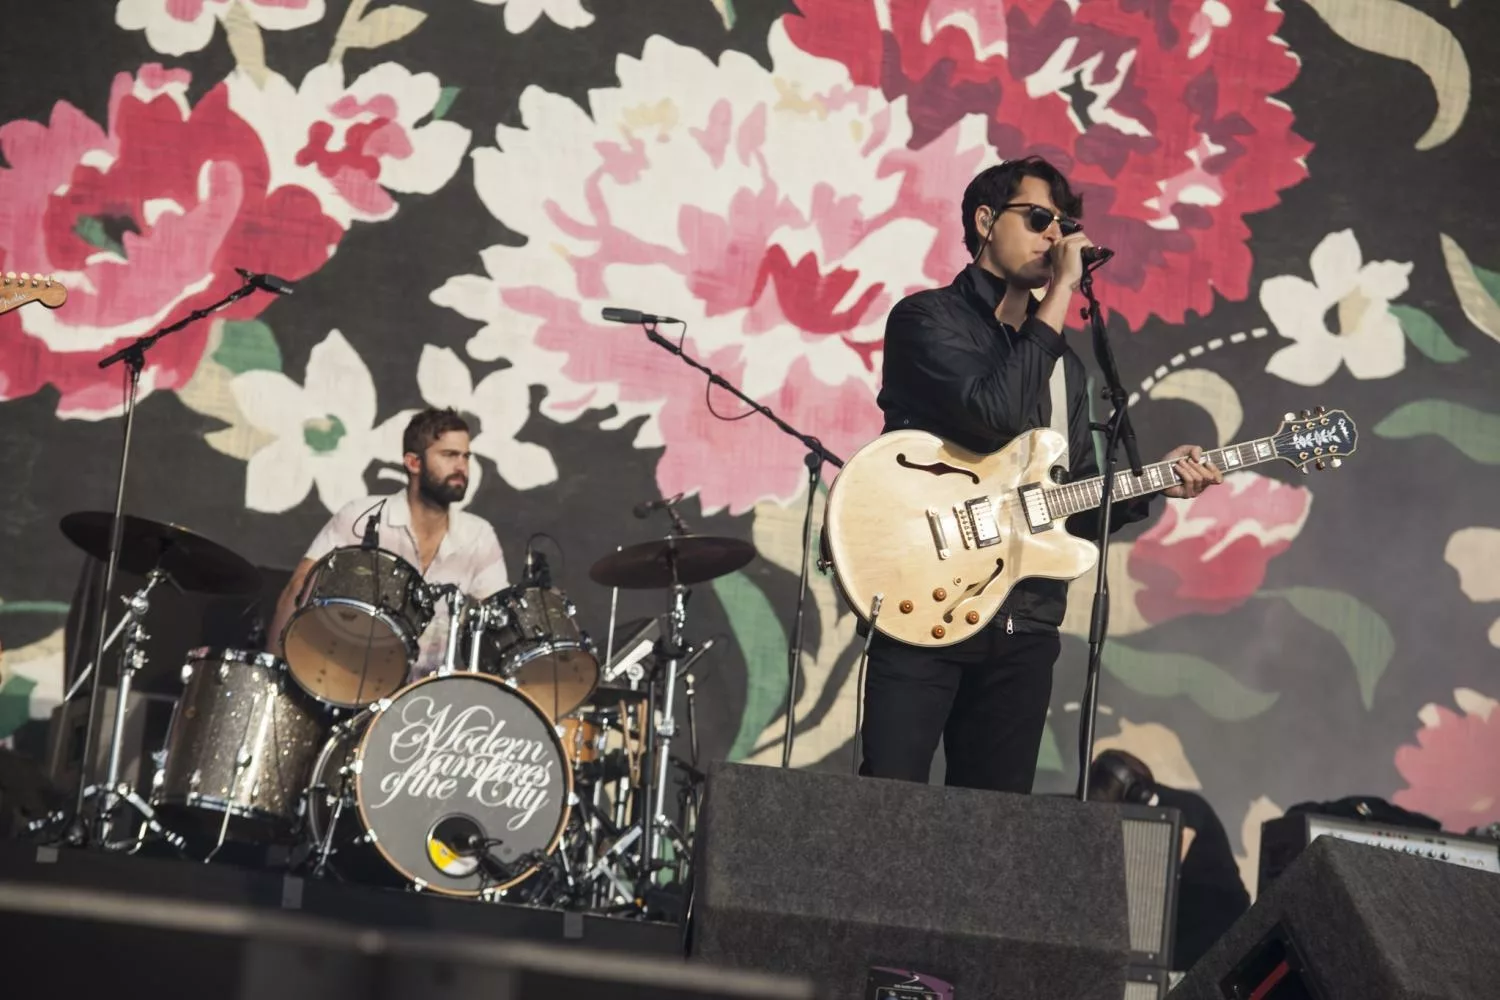 Vampire Weekend return to headline End Of The Road 2018, alongside St Vincent and more